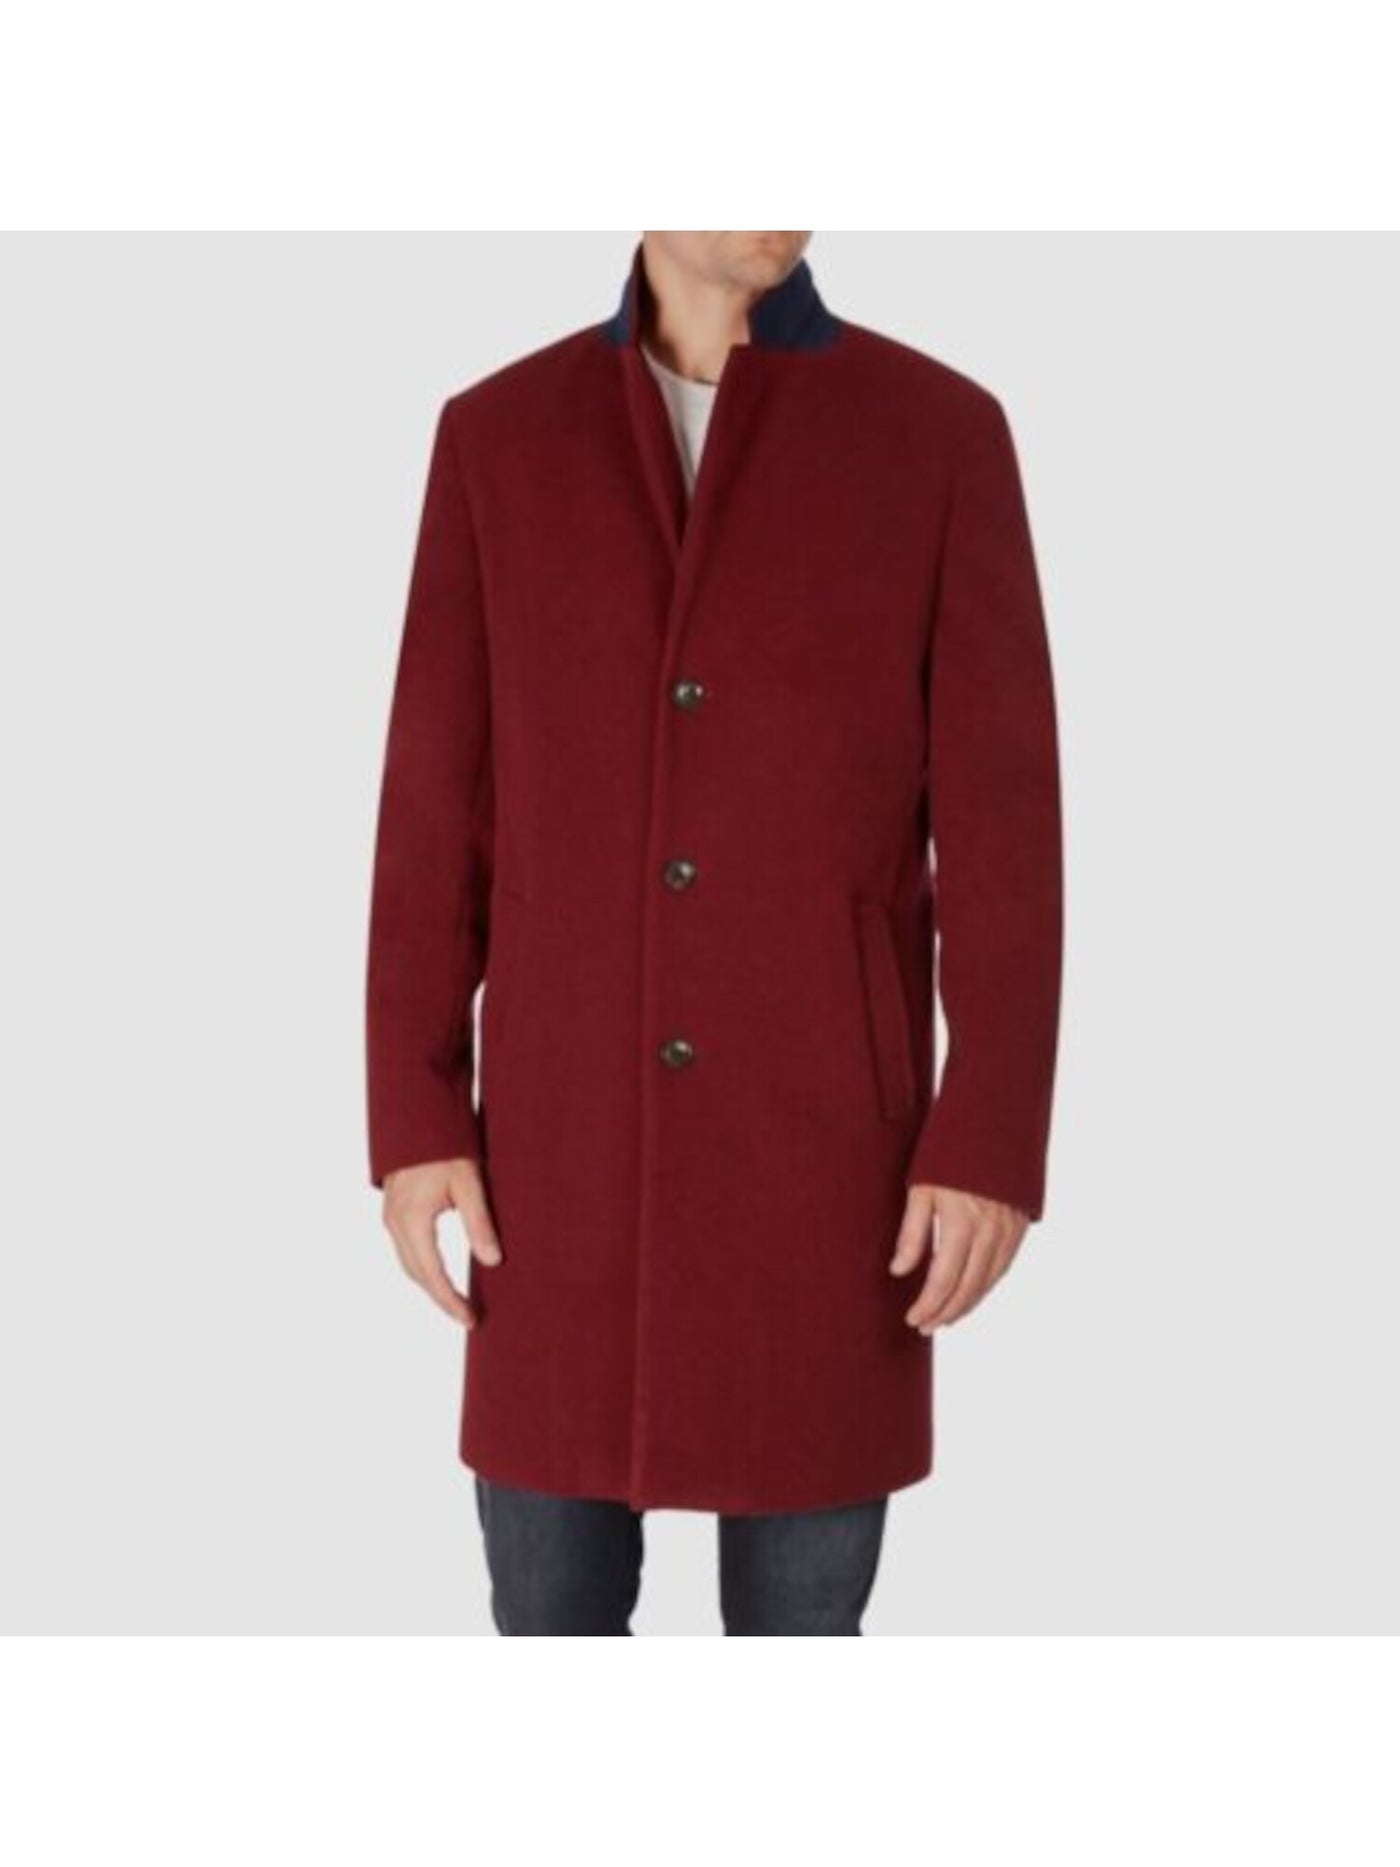 TOMMY HILFIGER Mens Addison Maroon Single Breasted, Wool Blend Overcoat 48R